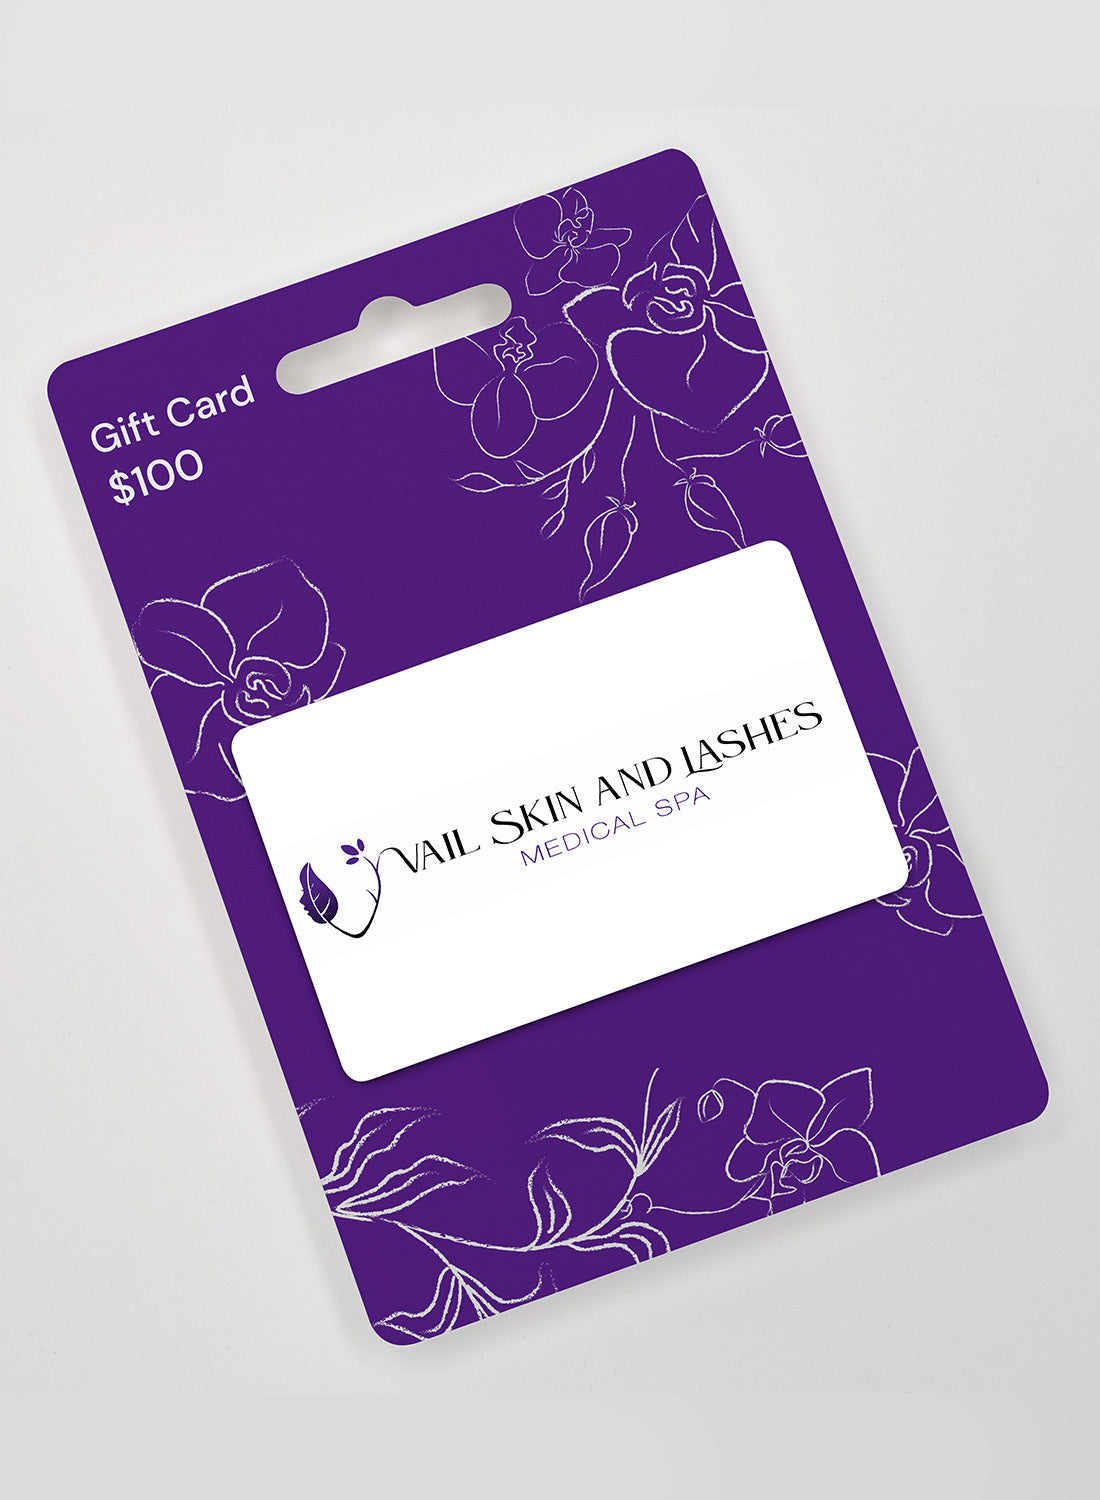 Vail Skin and Lashes Gift Card